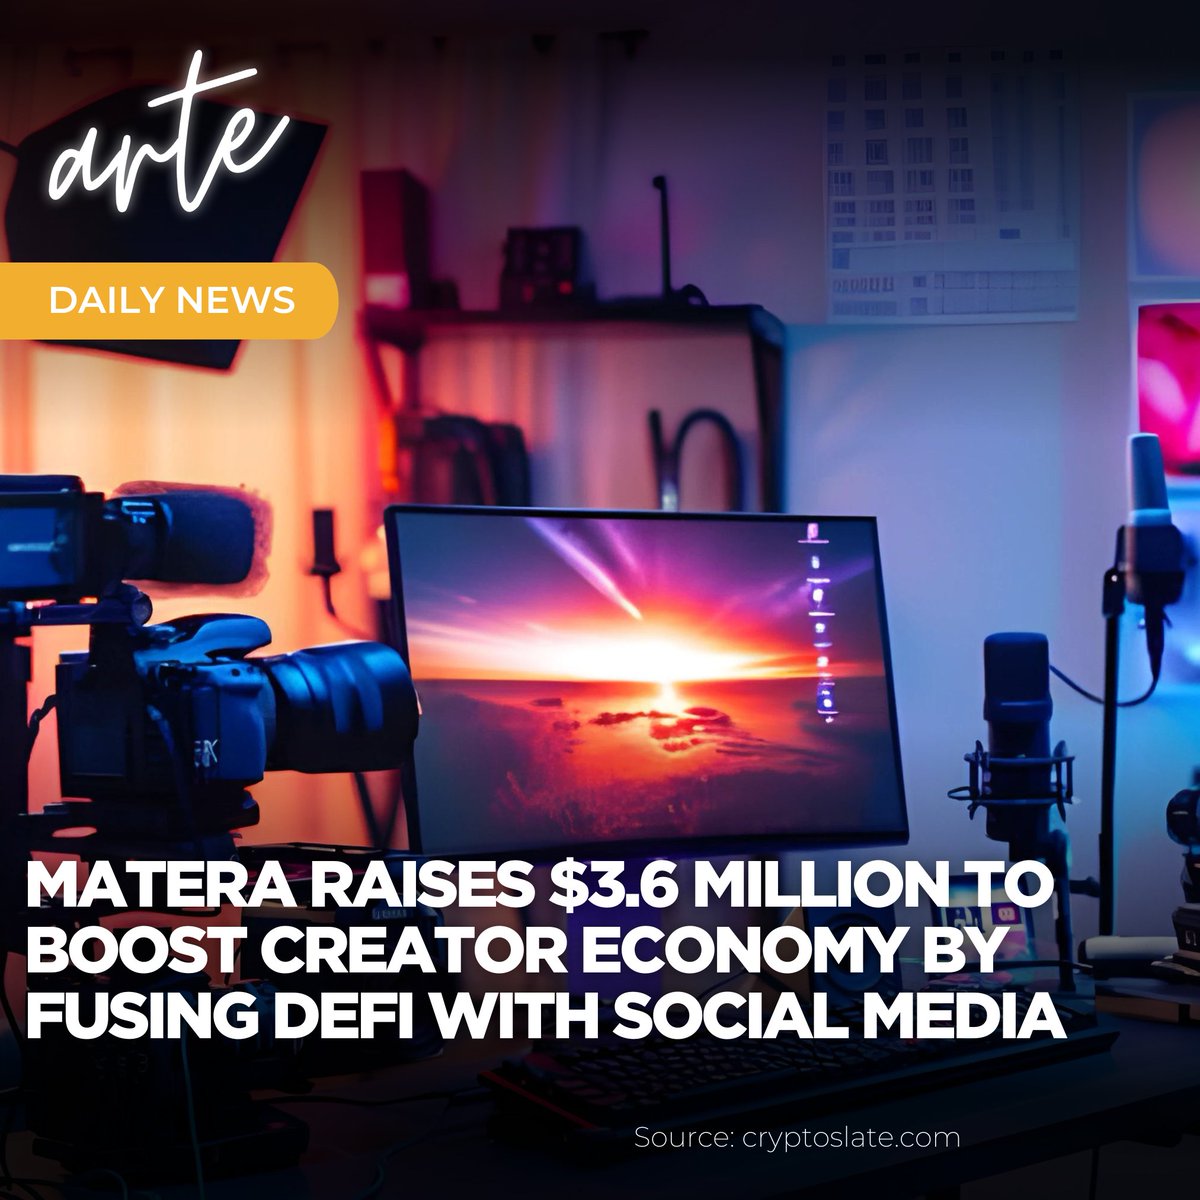 📢 arte Daily News

Web3 startup @MateraProtocol secures $3.6M to tackle creator economy monetization challenges, with funding from @sidedoor_vc, HighCass Crypto, Medusa Ventures, @TheSandboxGame & Saxon Partners. 

tinyurl.com/yscrmmsu

@CryptoSlate